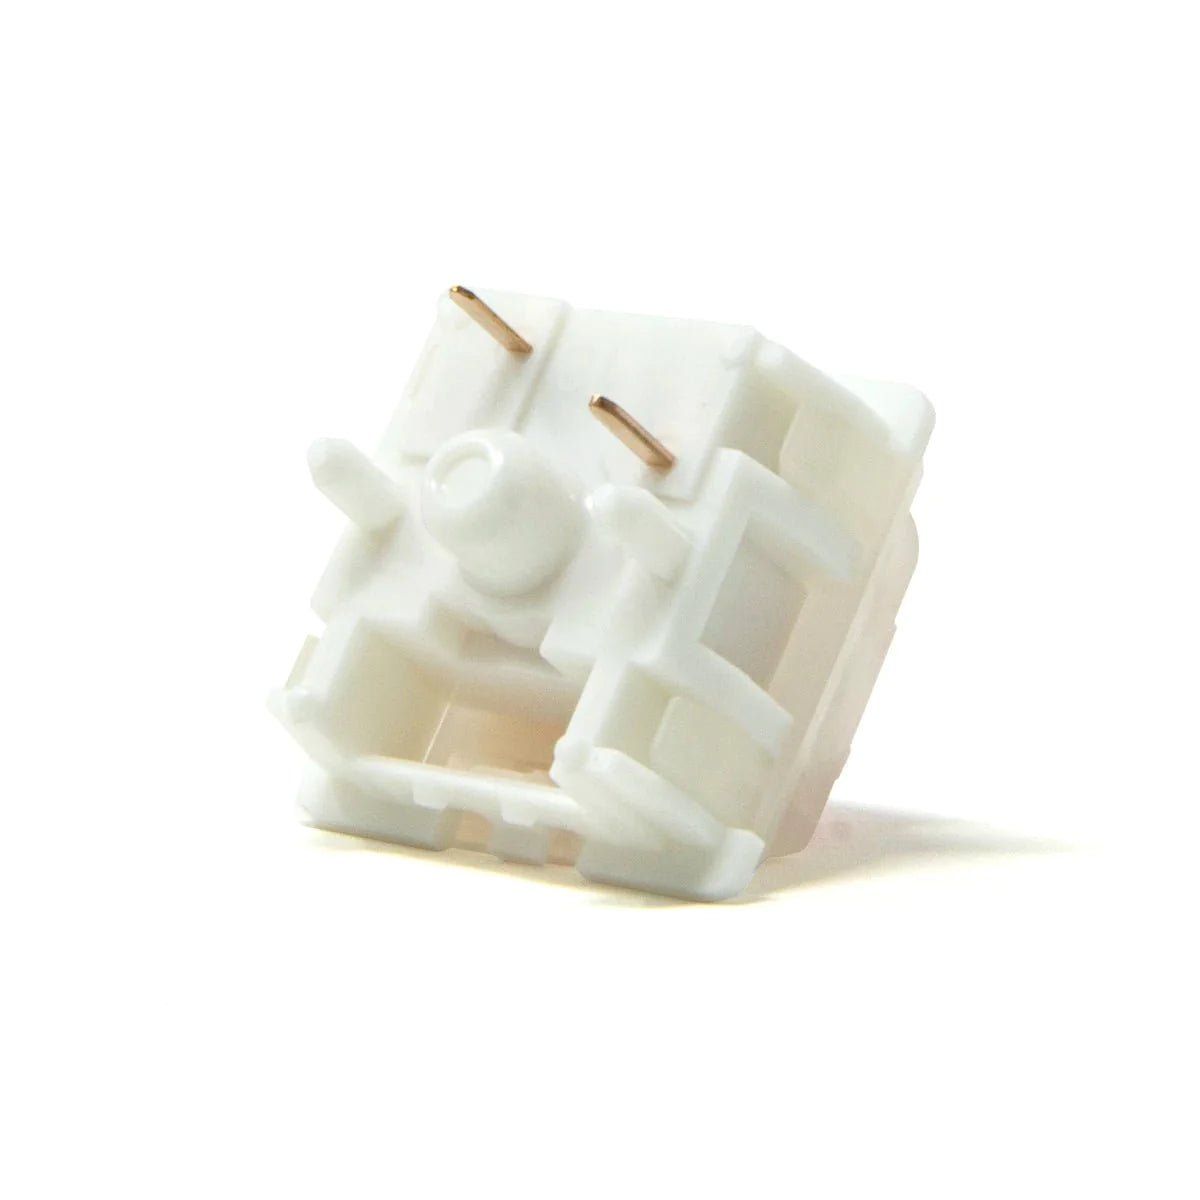 Tecsee Strawberry Ice Linear Switches - Meow Key